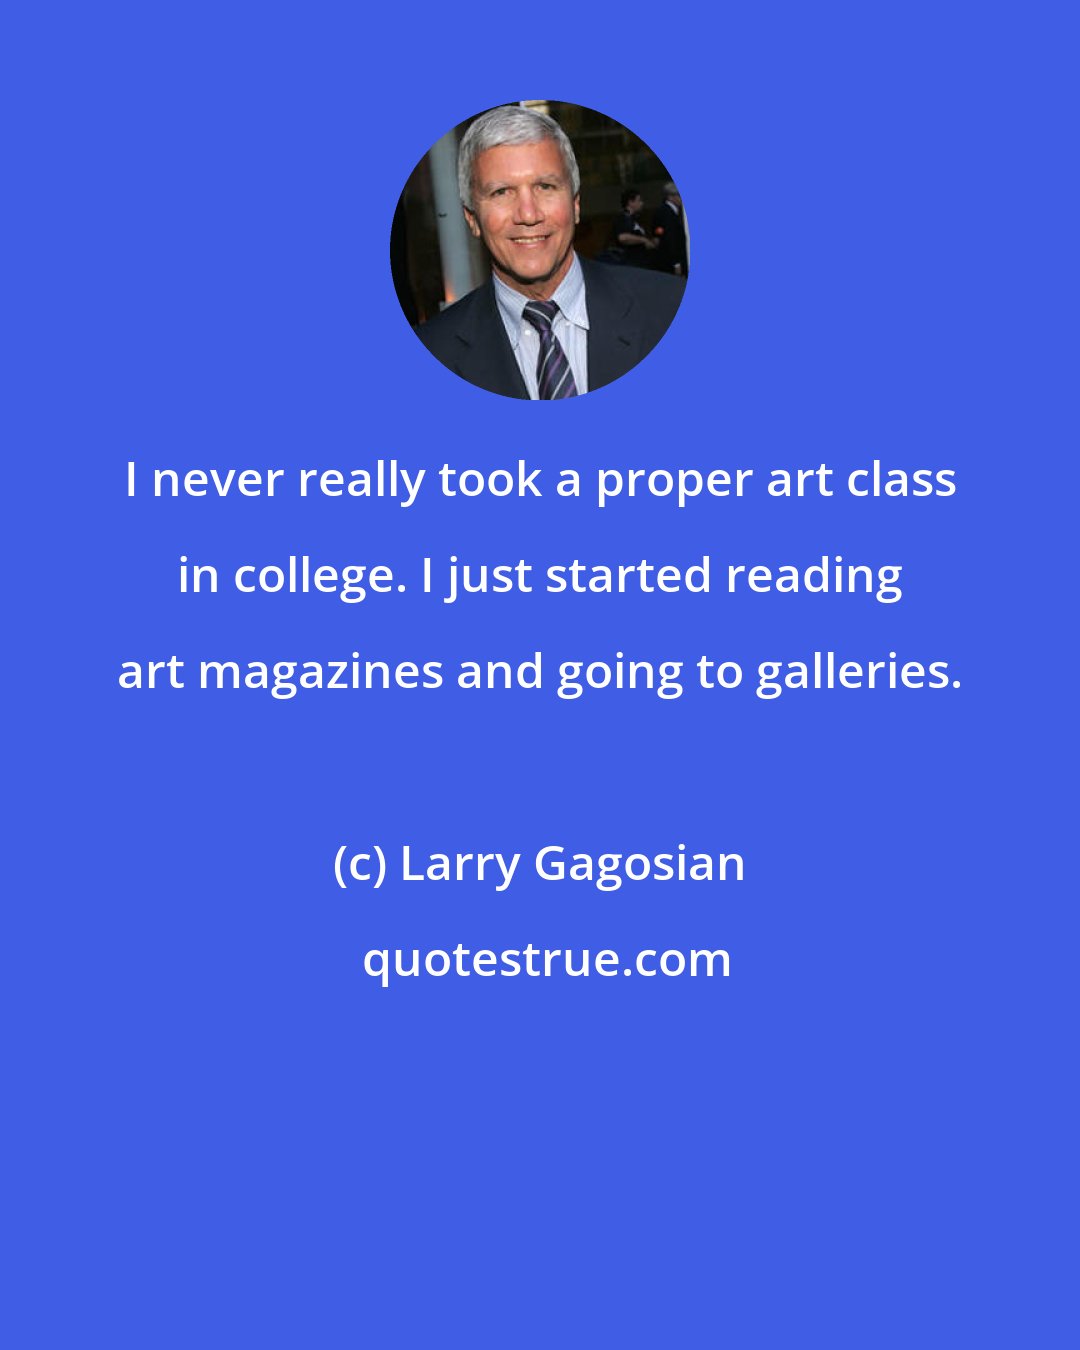 Larry Gagosian: I never really took a proper art class in college. I just started reading art magazines and going to galleries.